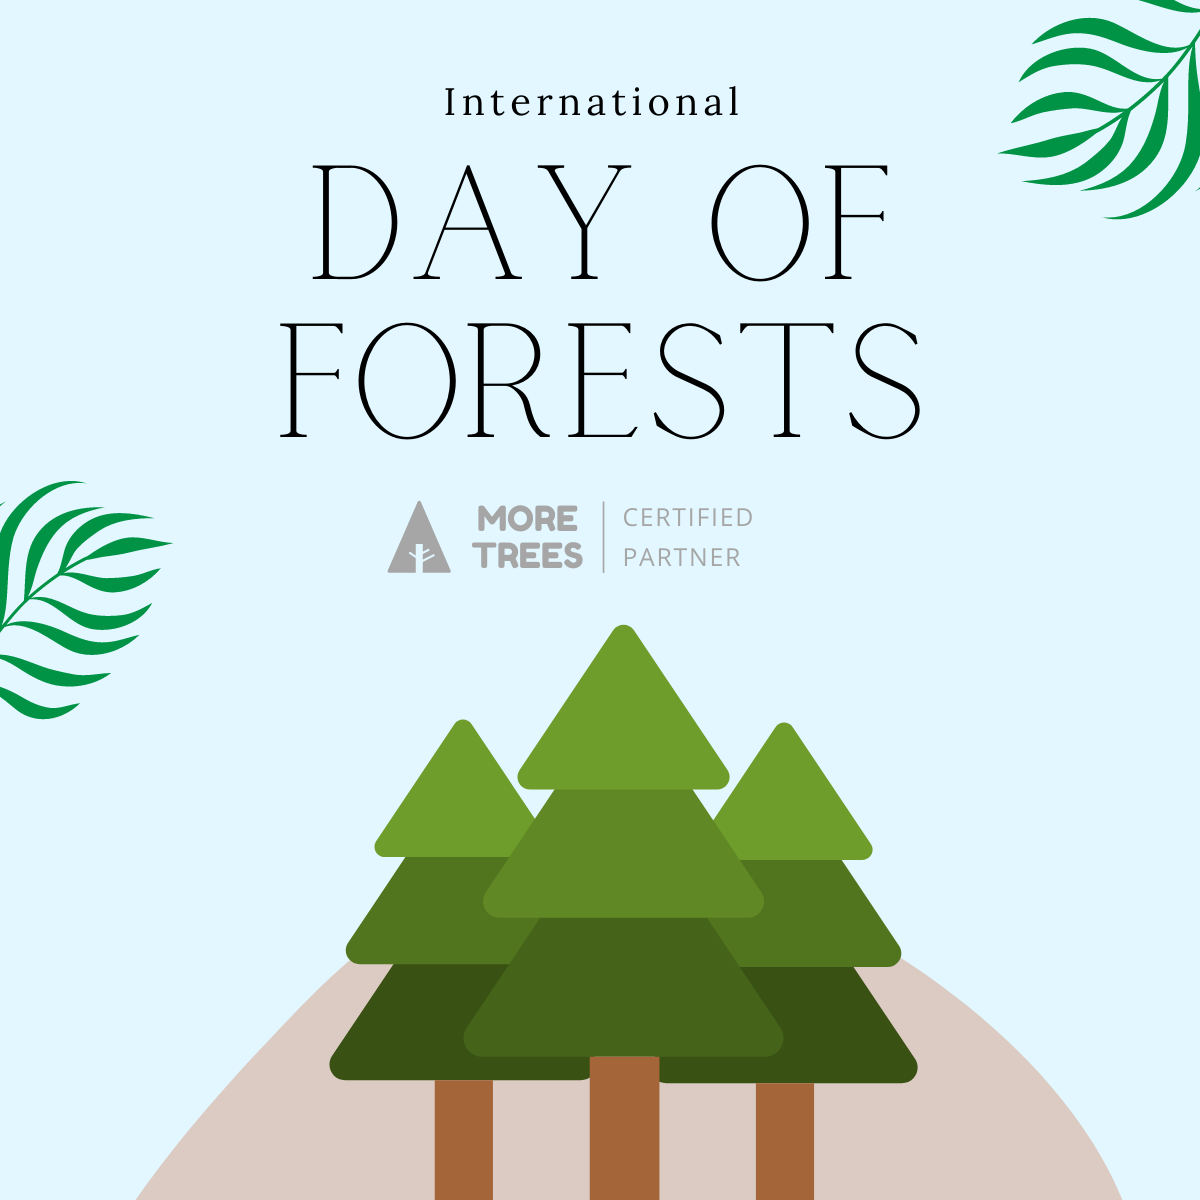 International Day of Forests poster